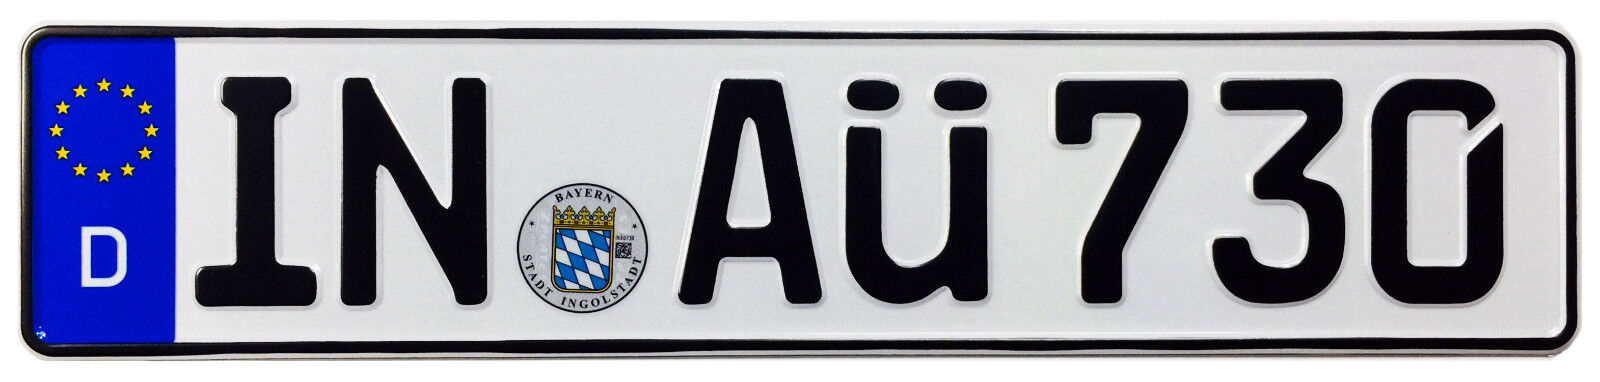 Audi Ingolstadt Front German License Plate AÜ by Z Plates with Unique Number NEW